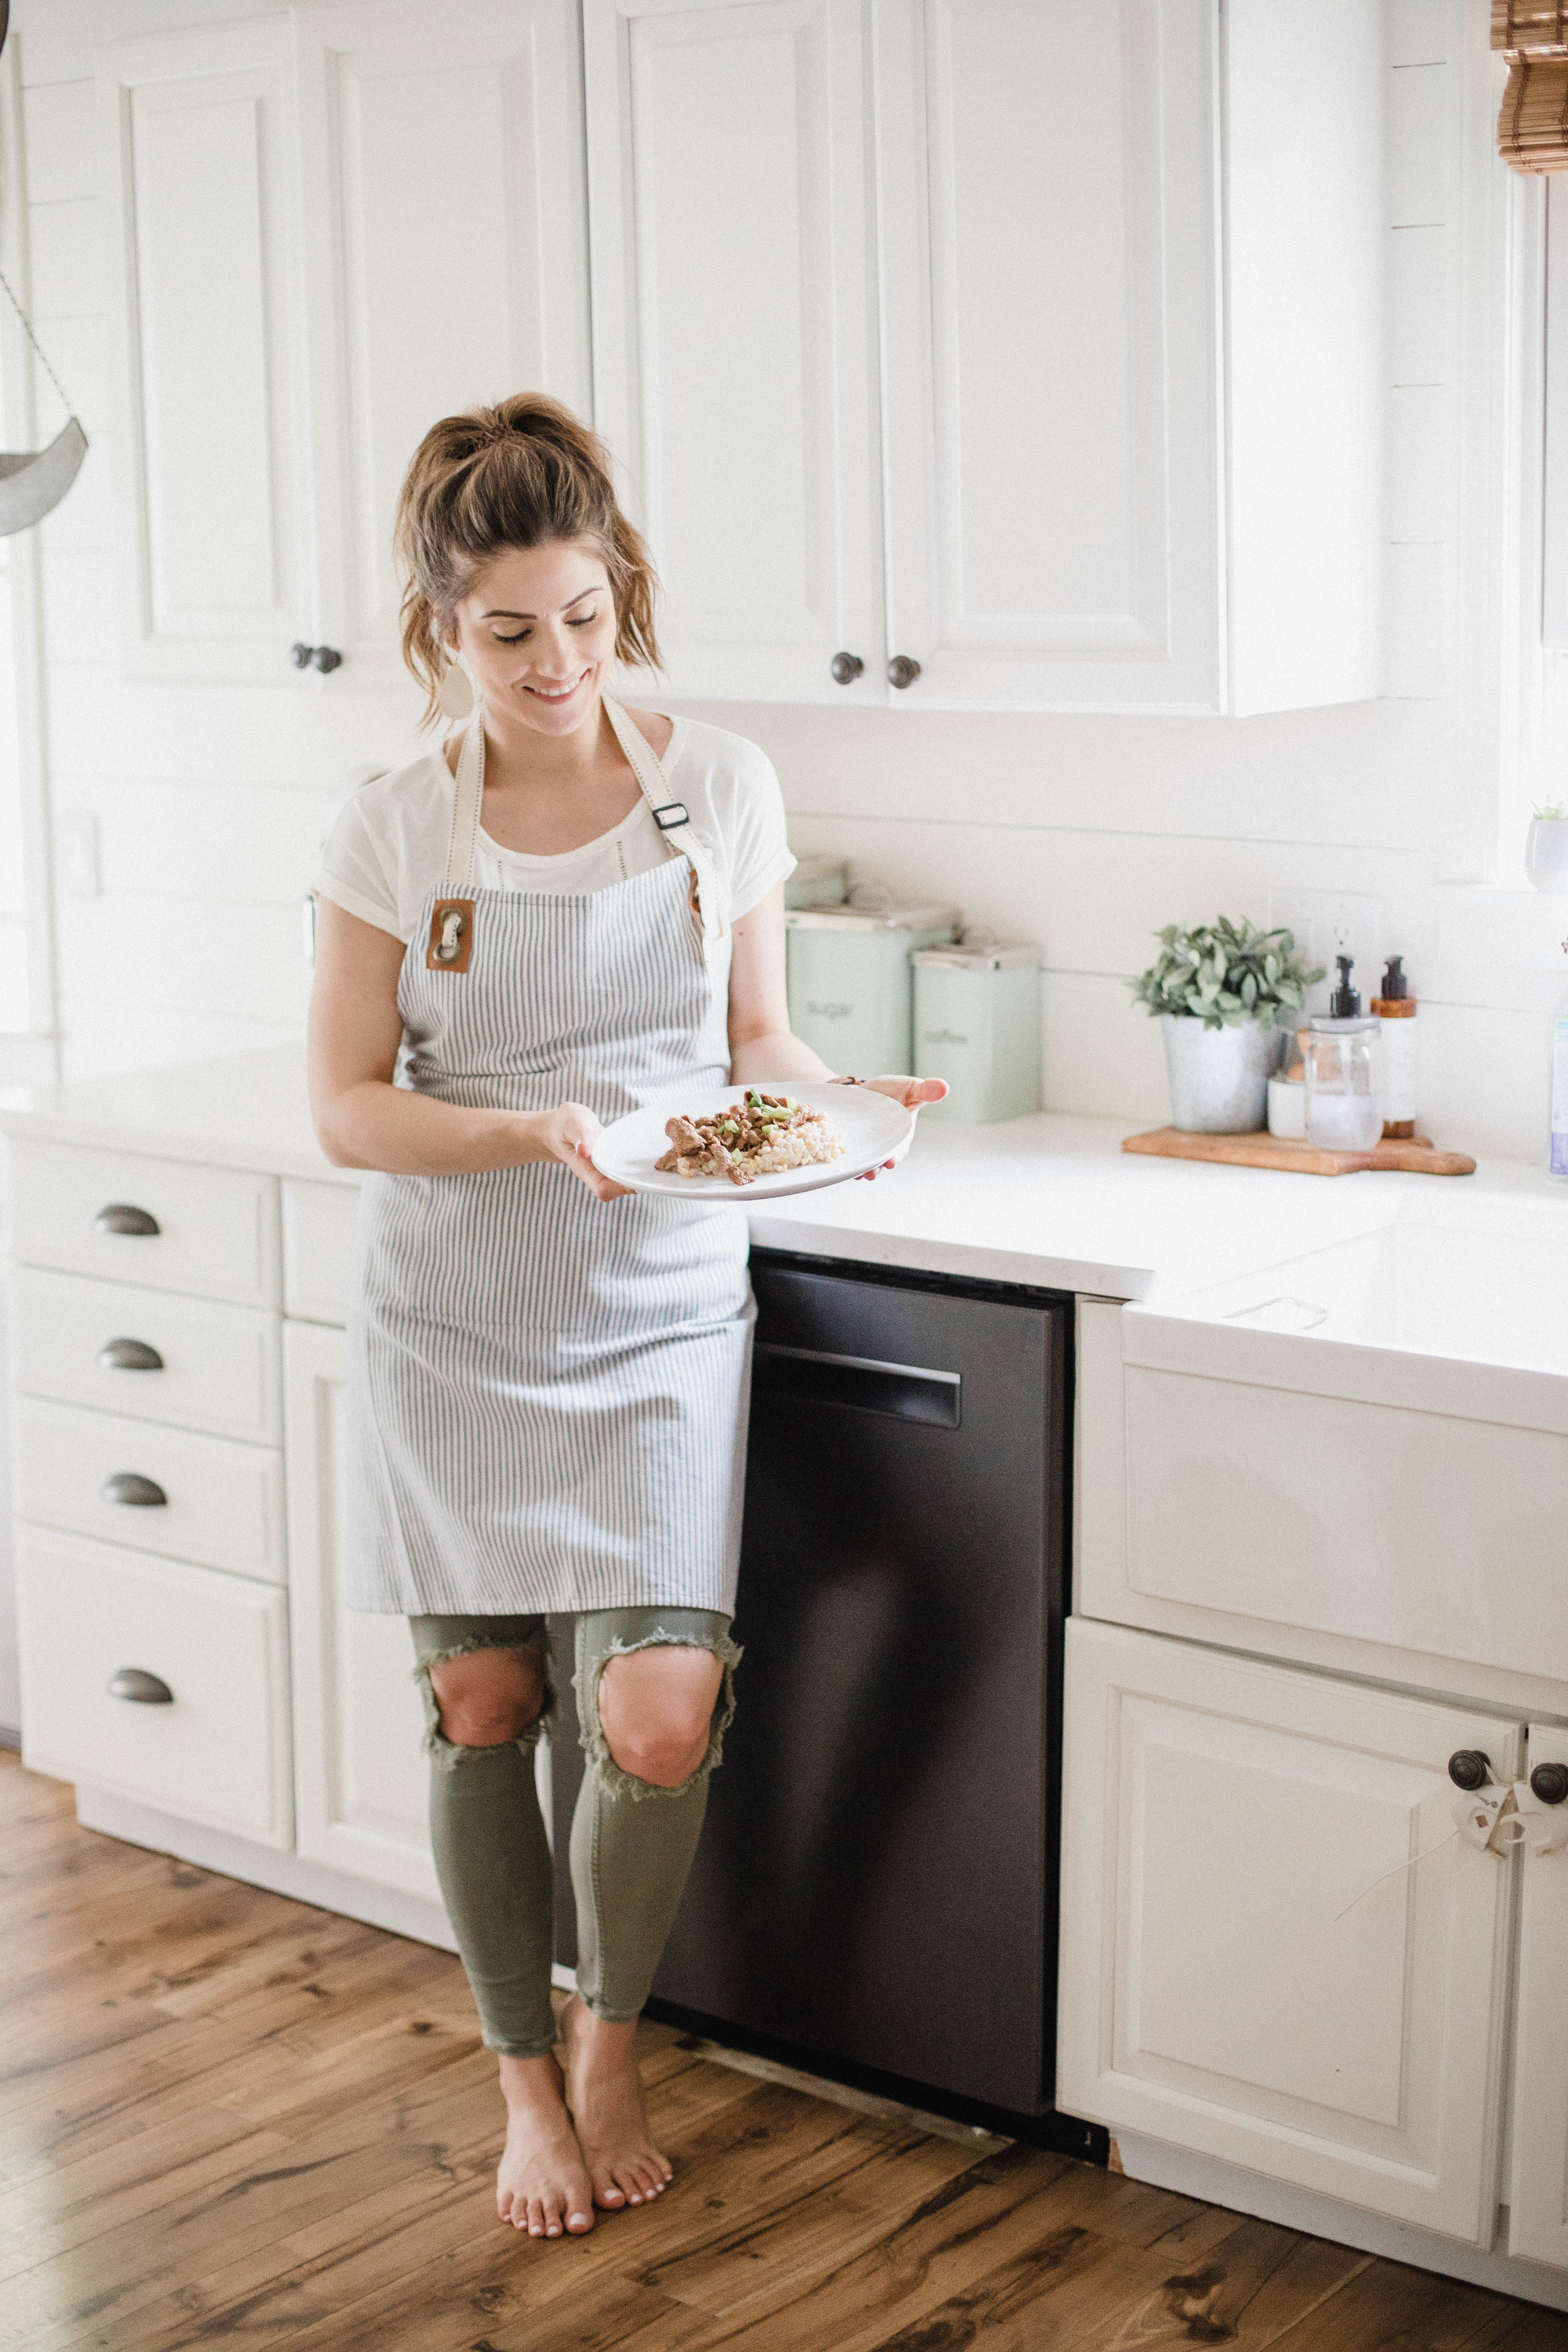 Life and style blogger Lauren McBride shares a tip for a stress-free meal time, including a coupon code for Home Chef meal delivery kit.